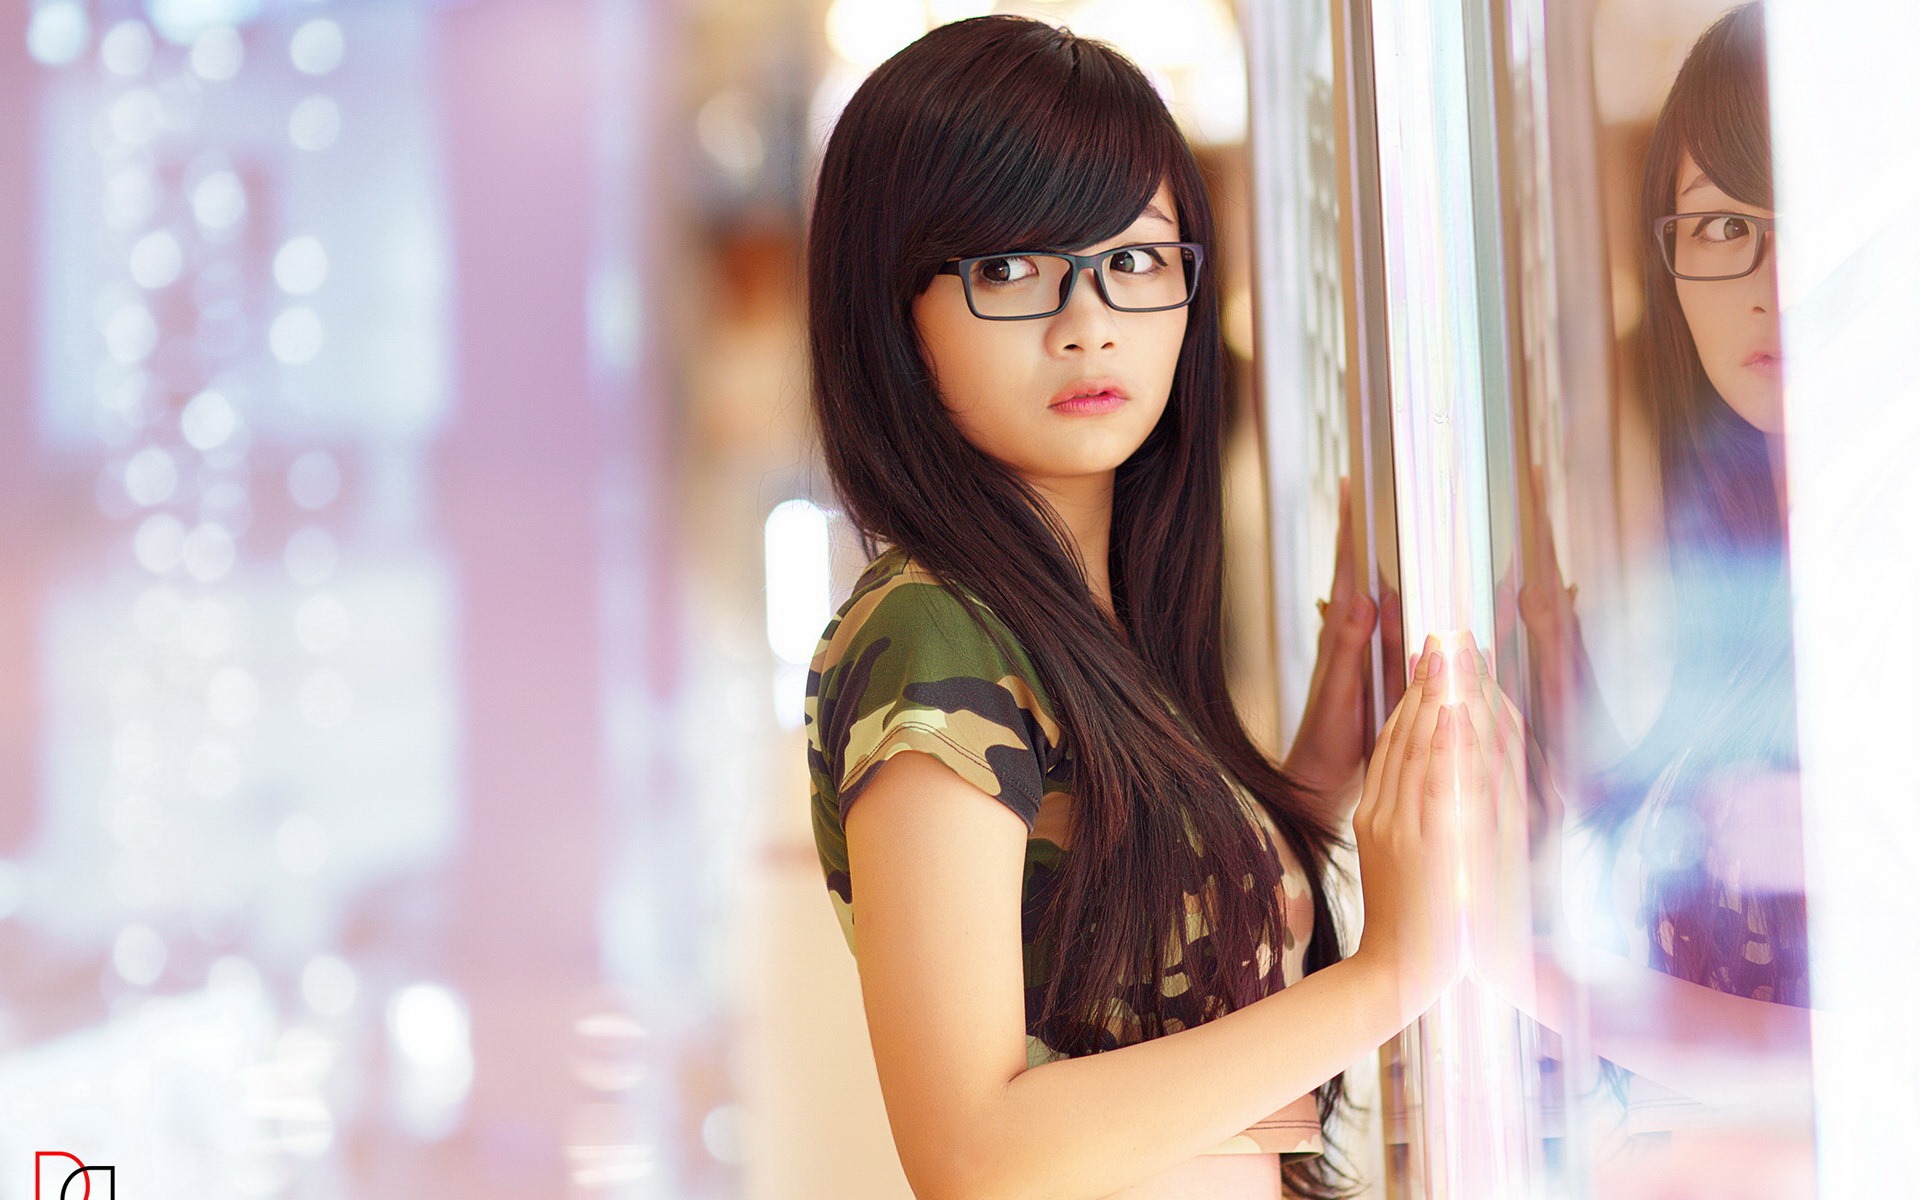 Pure and lovely young Asian girl HD wallpapers collection (3) #36 - 1920x1200